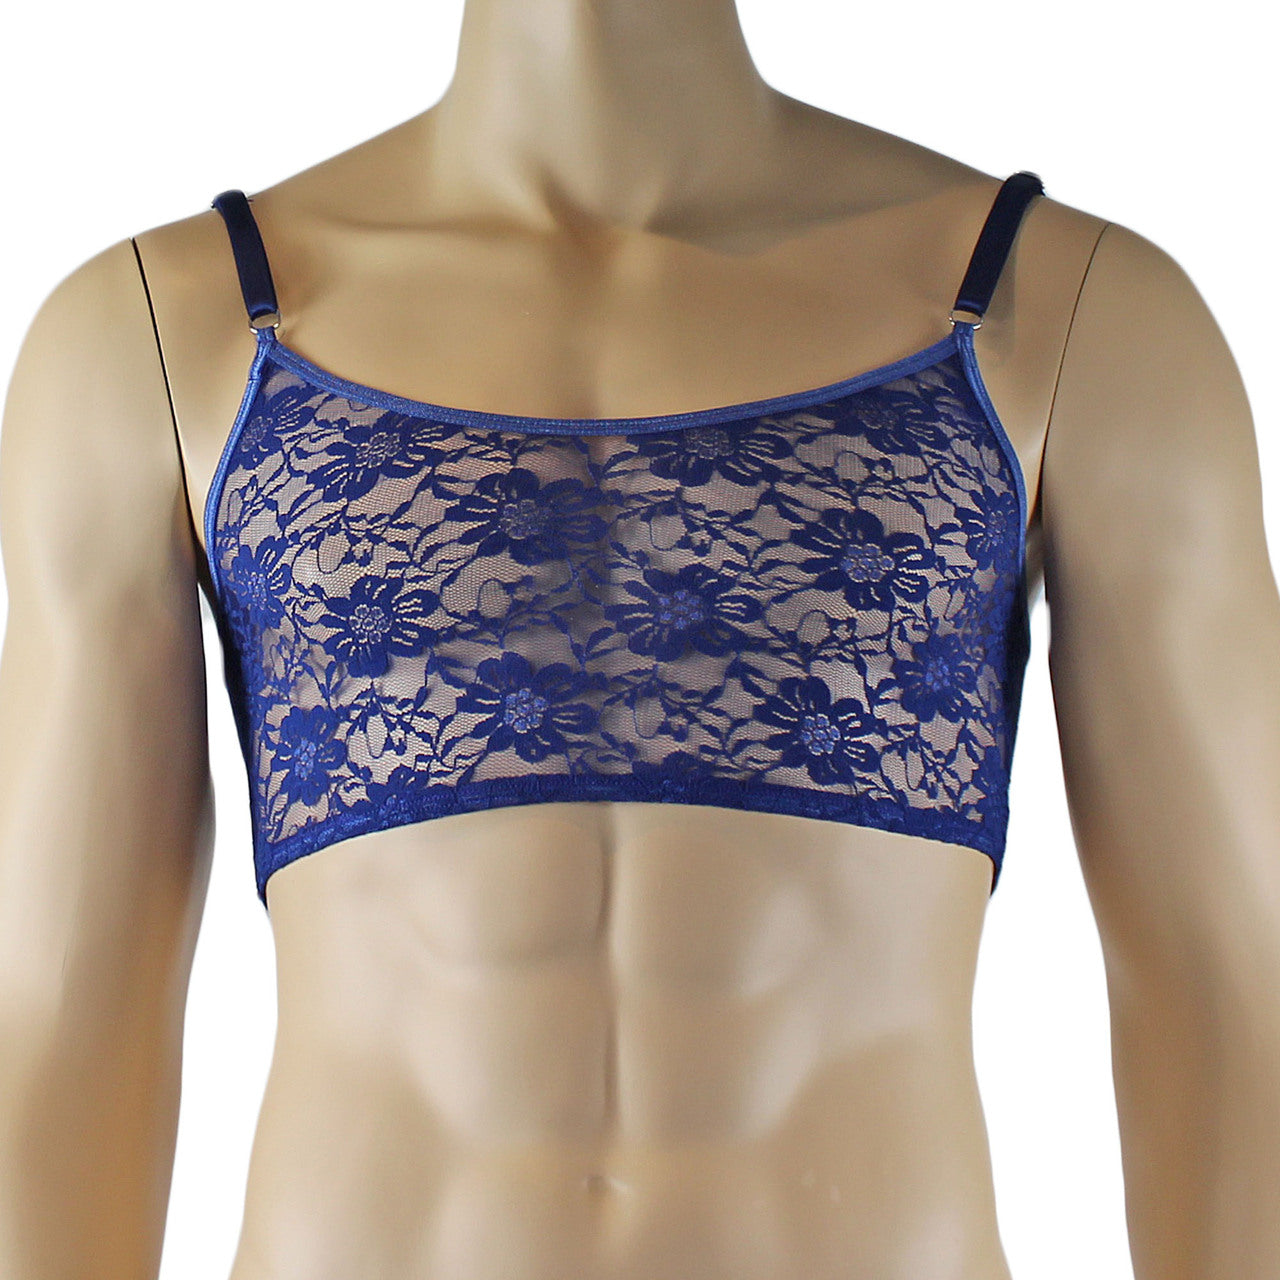 LAST ORDERS - Mens Sexy Lace Crop Bra Top Camisole and G string Male Lingerie Navy